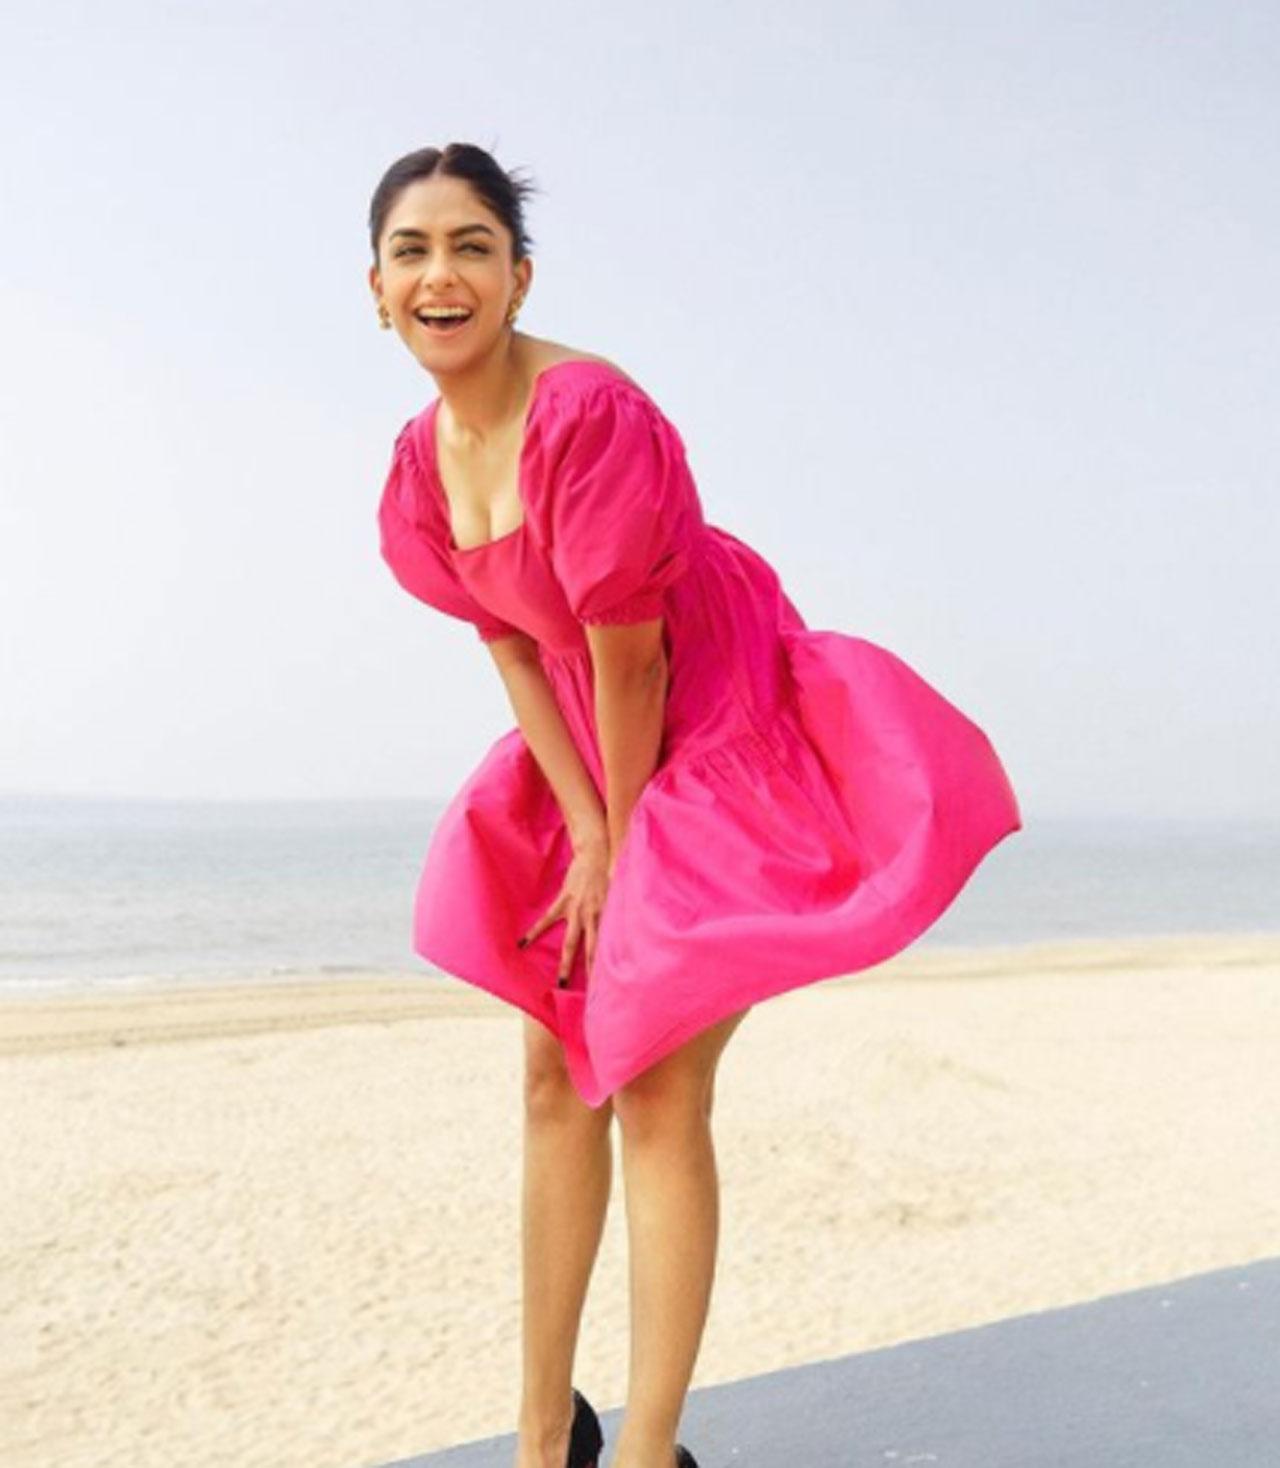 She slays in a pink dress and smiles for the camera back when she was promoting her film 'Jersey'. But it’s not just the smile that steals the show, it’s also her attitude and the right dose of spark and spunk.